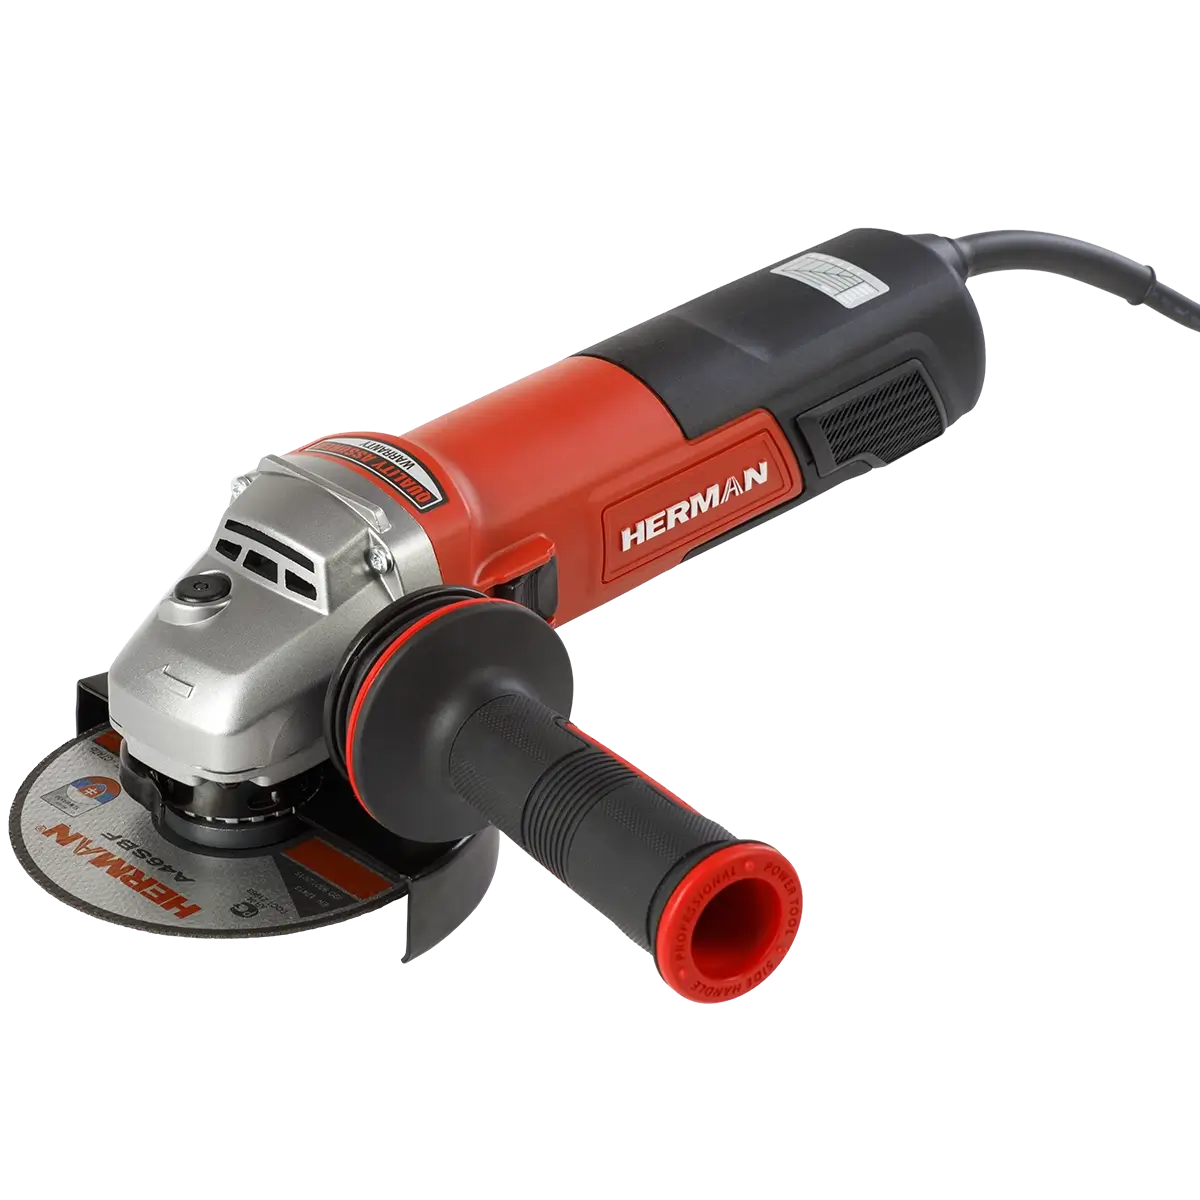 Angle Grinder HERMAN WX 12508 125 mm | 1500 W 11010004